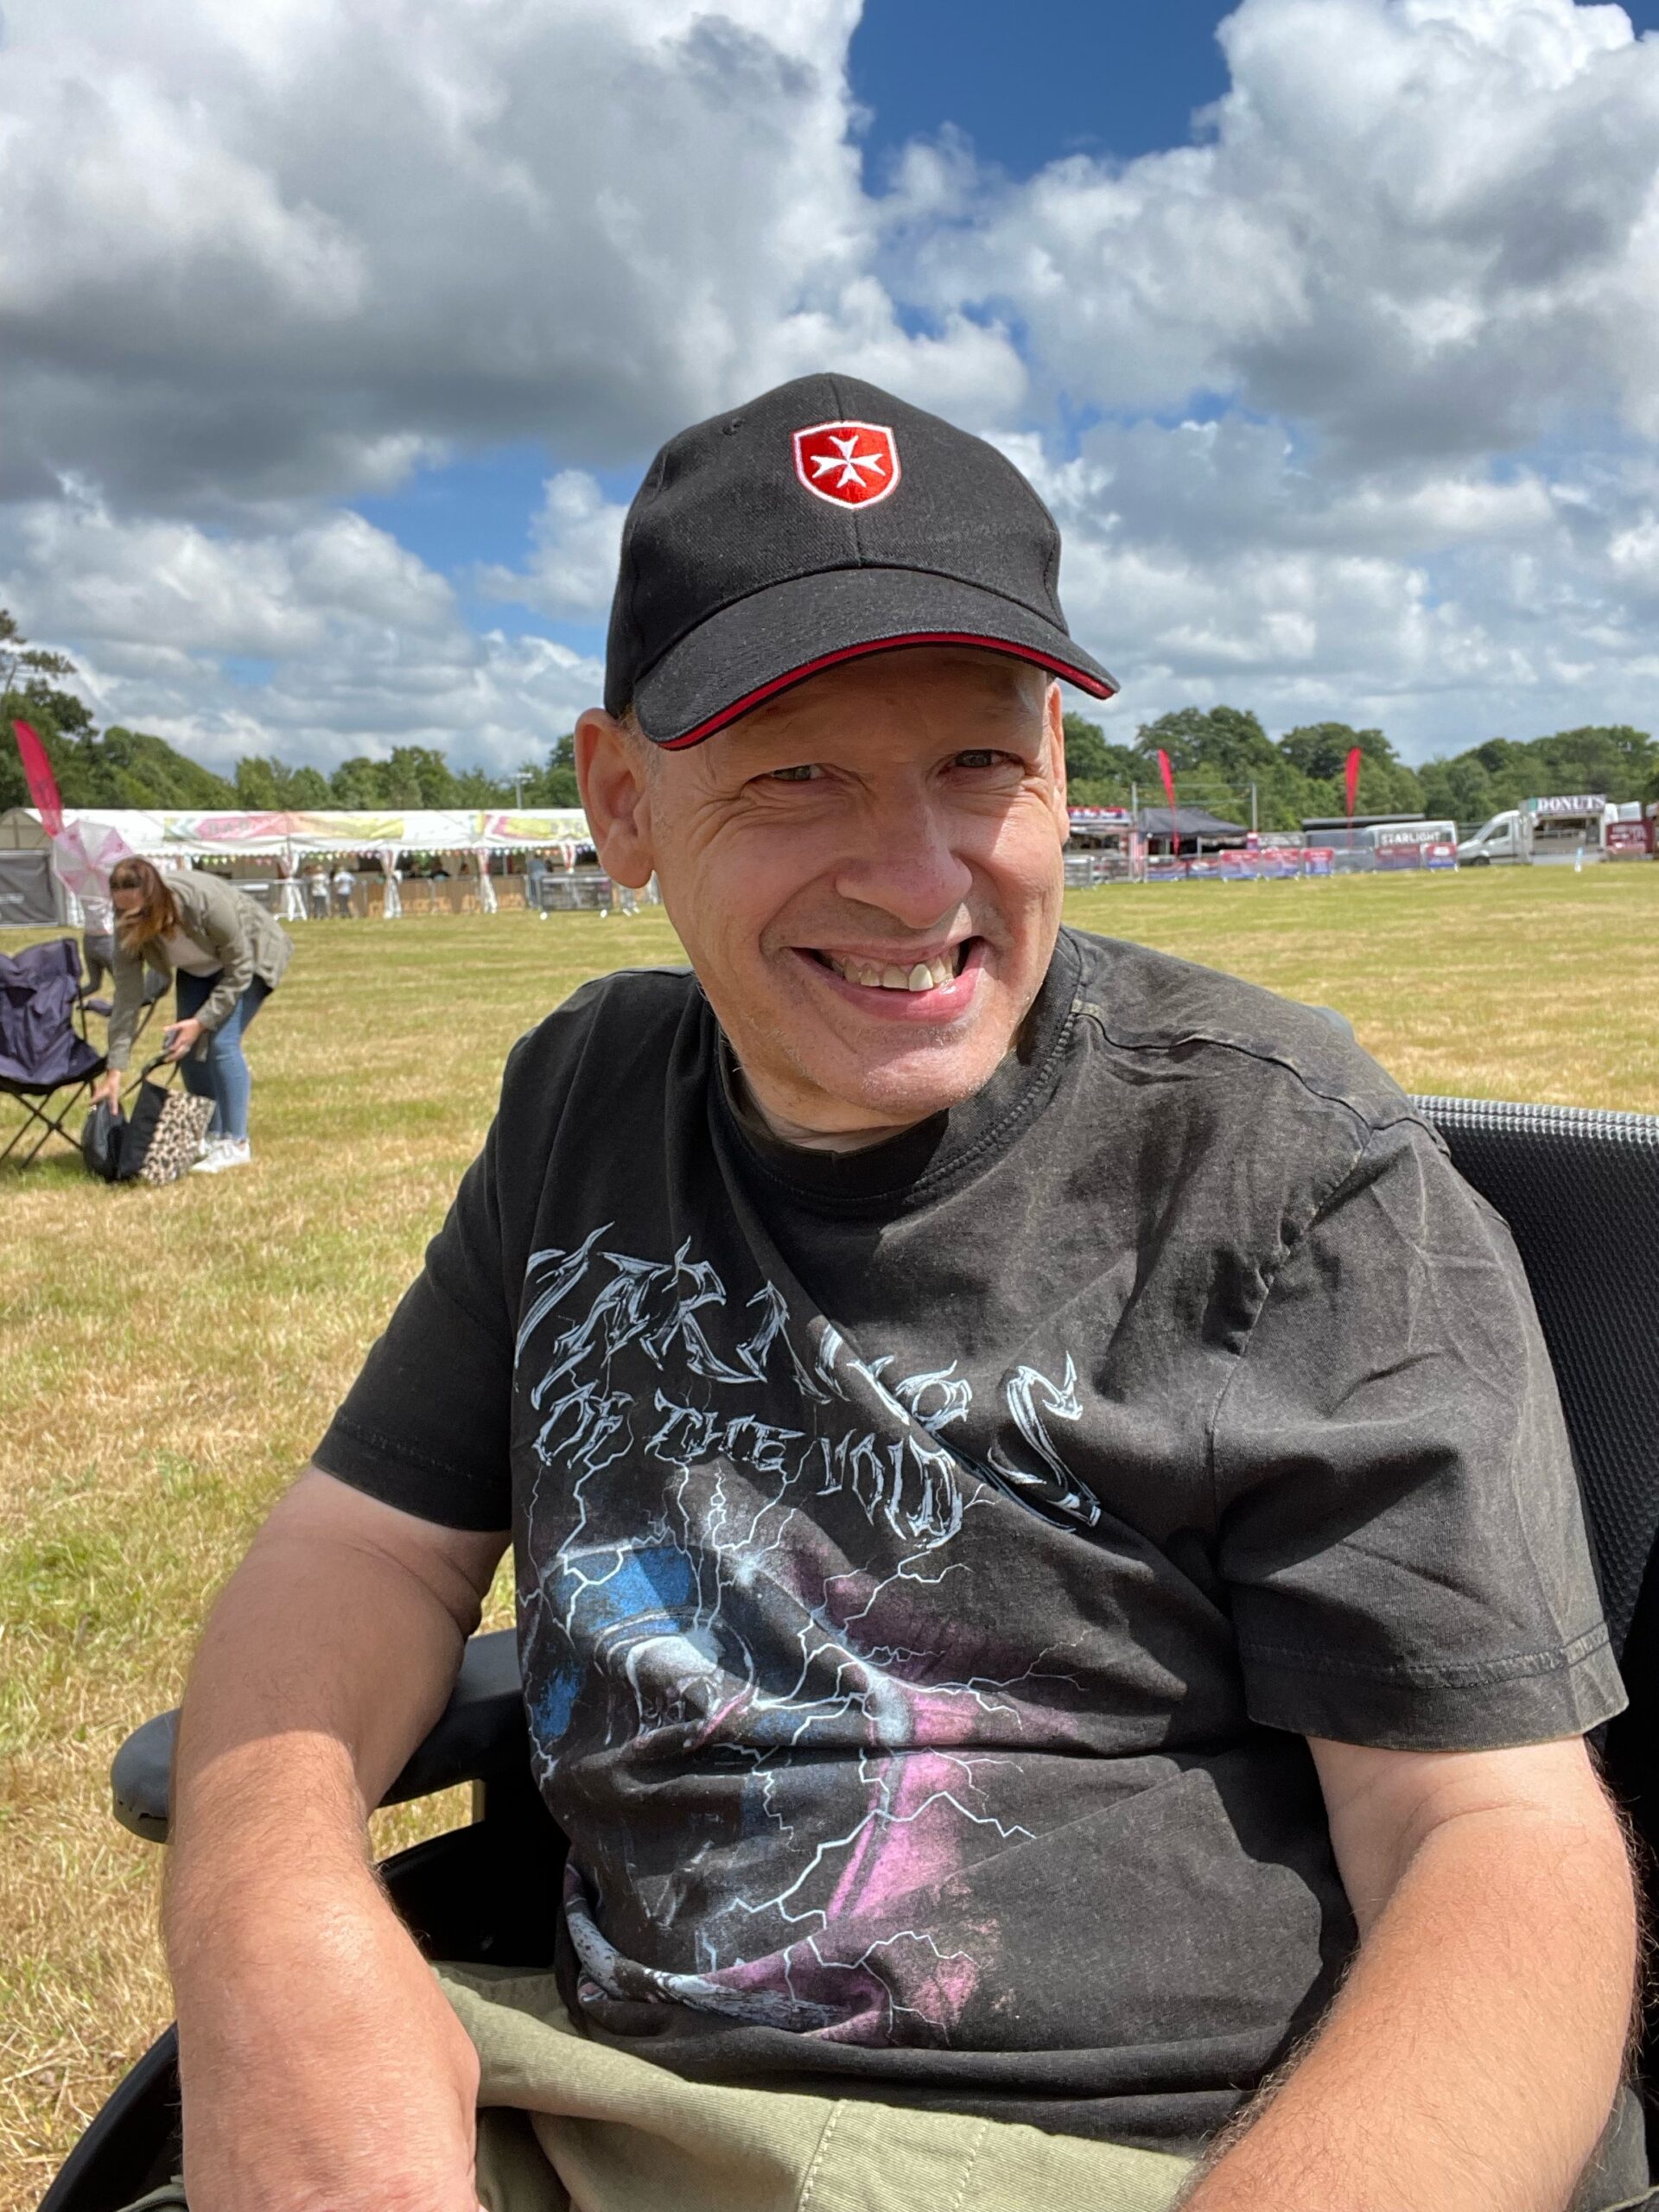 Simon Pugsley from Roman House pictured in his wheelchair attending Legends Festival